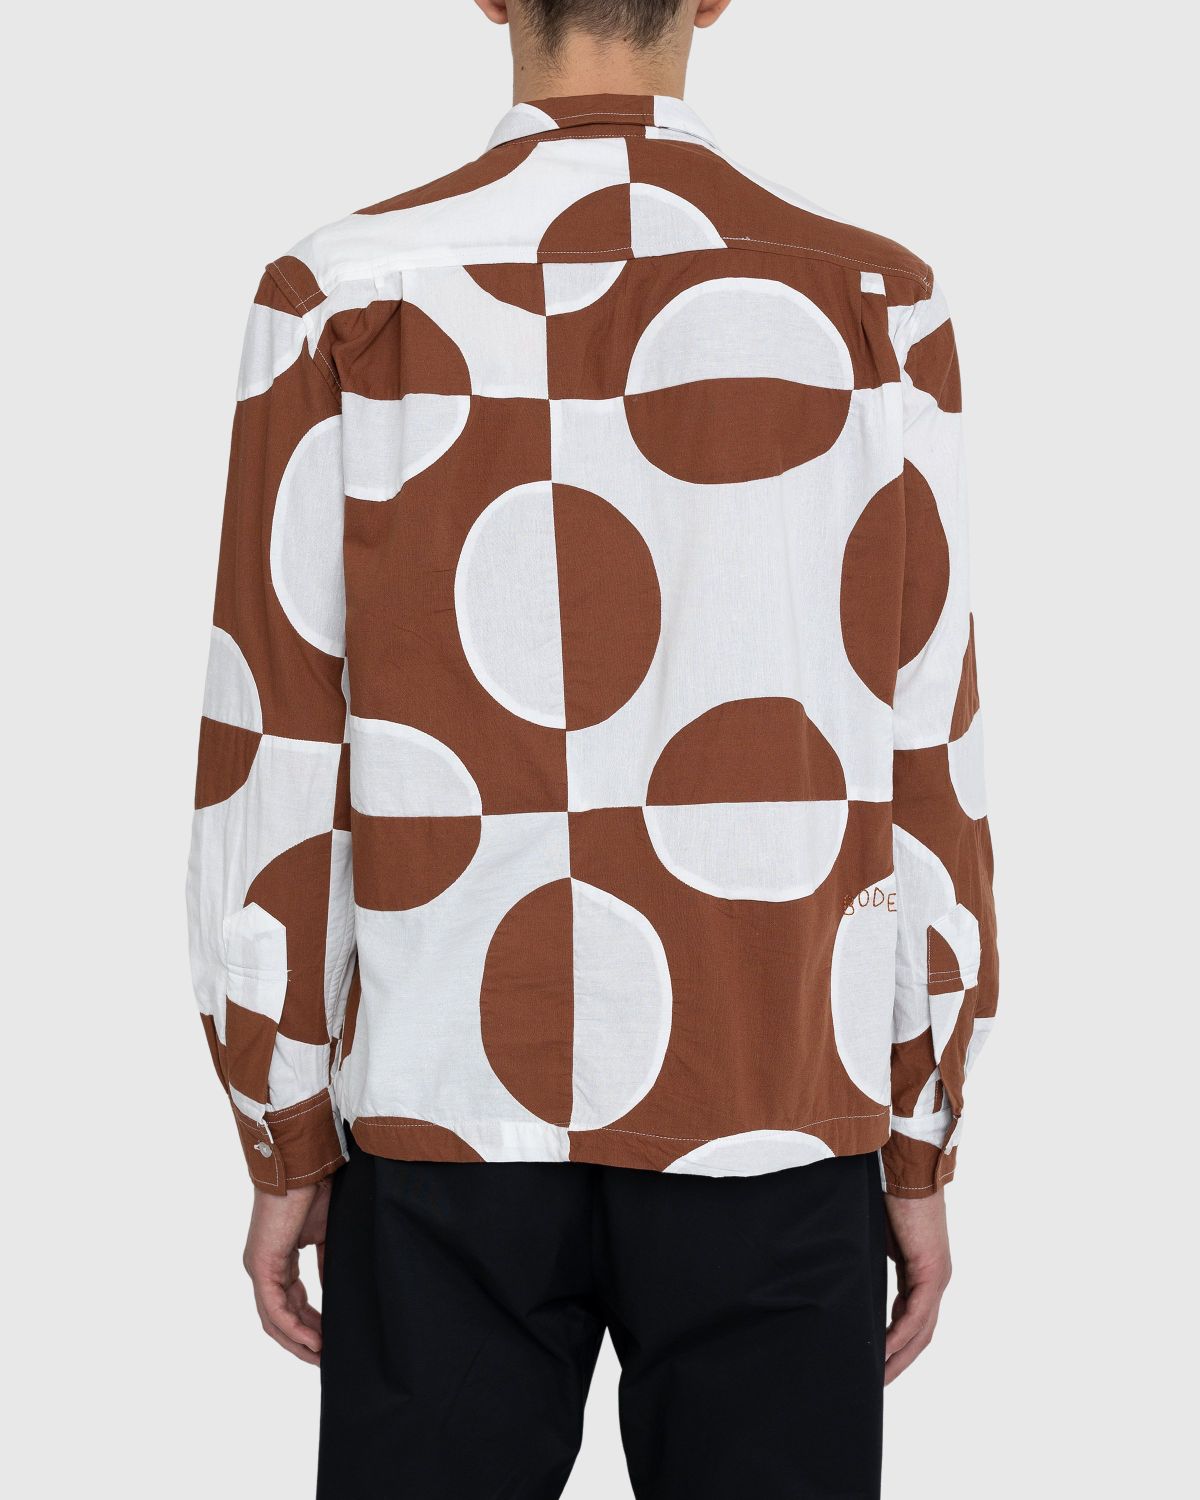 bode – Duo Oval Patchwork Long-Sleeve Shirt Brown - Shirts - Multi - Image 4